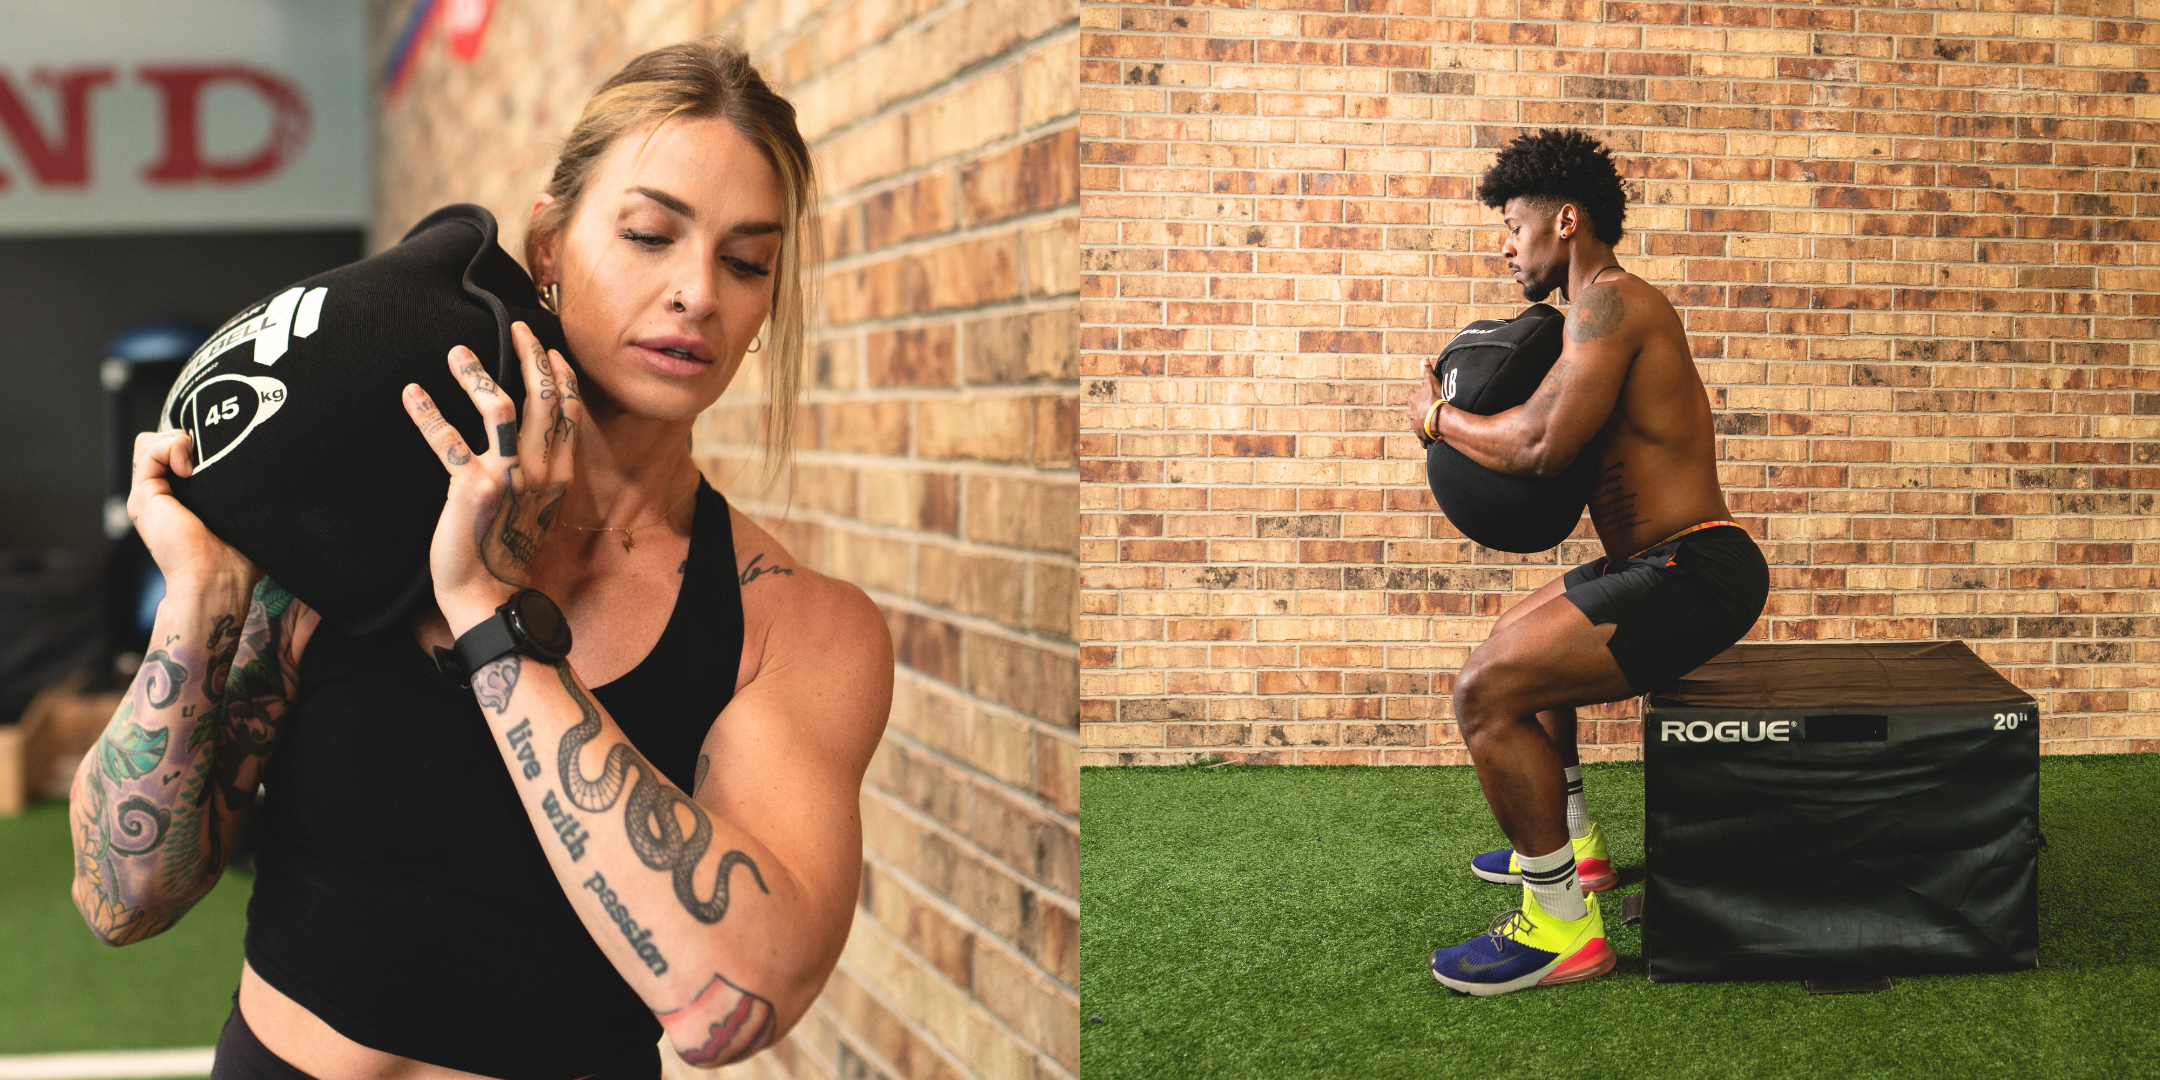 Images of fitness models working out with strongman sandbags and steelbell slam balls